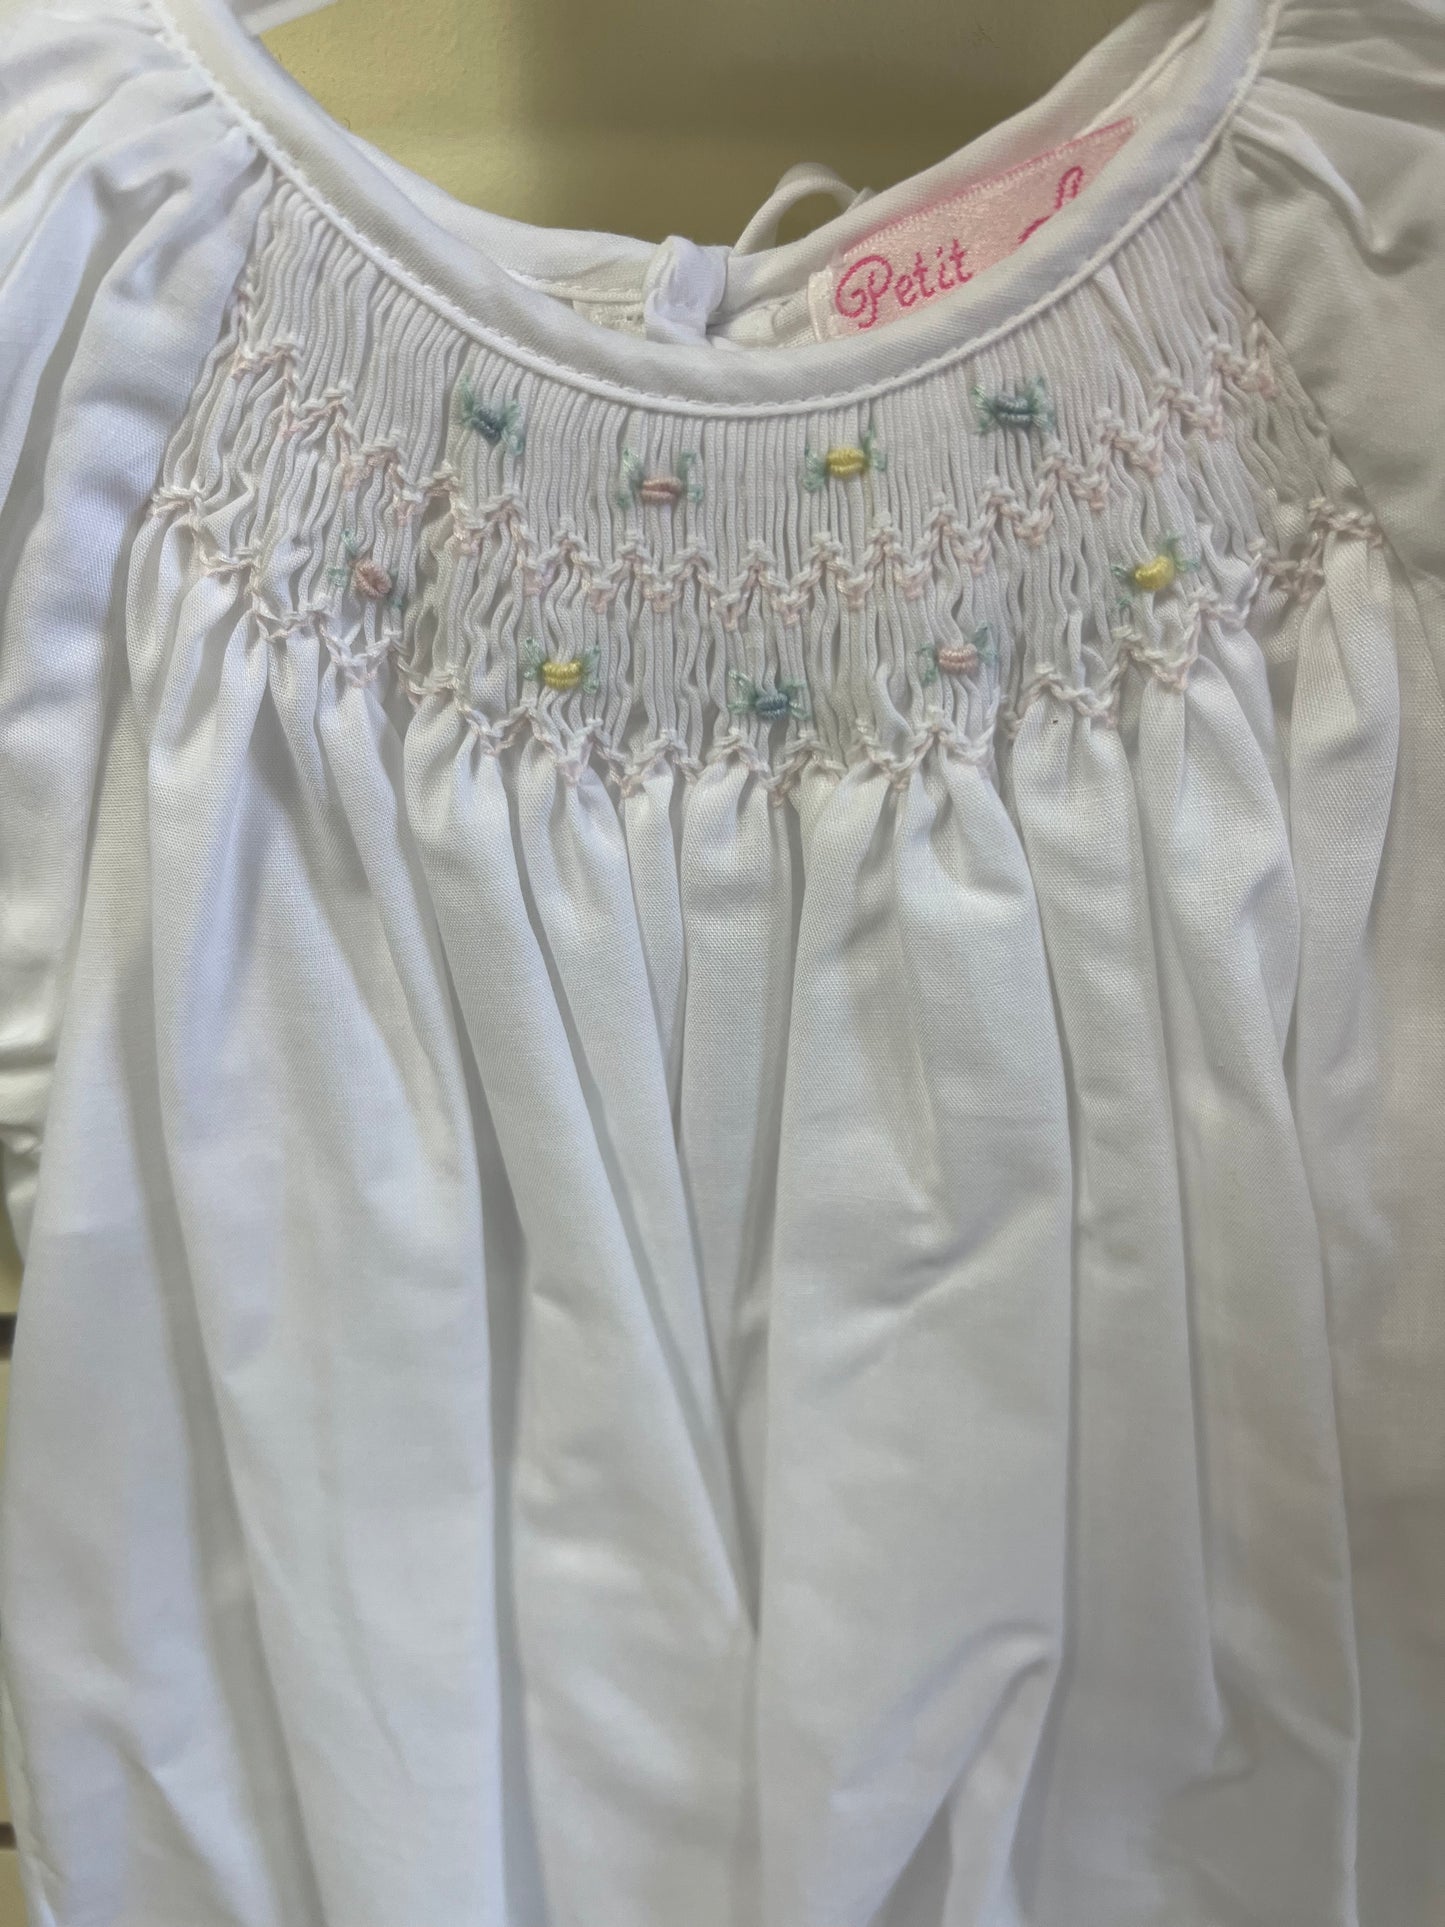 Day gown with raglan sleeves and embroidered hem